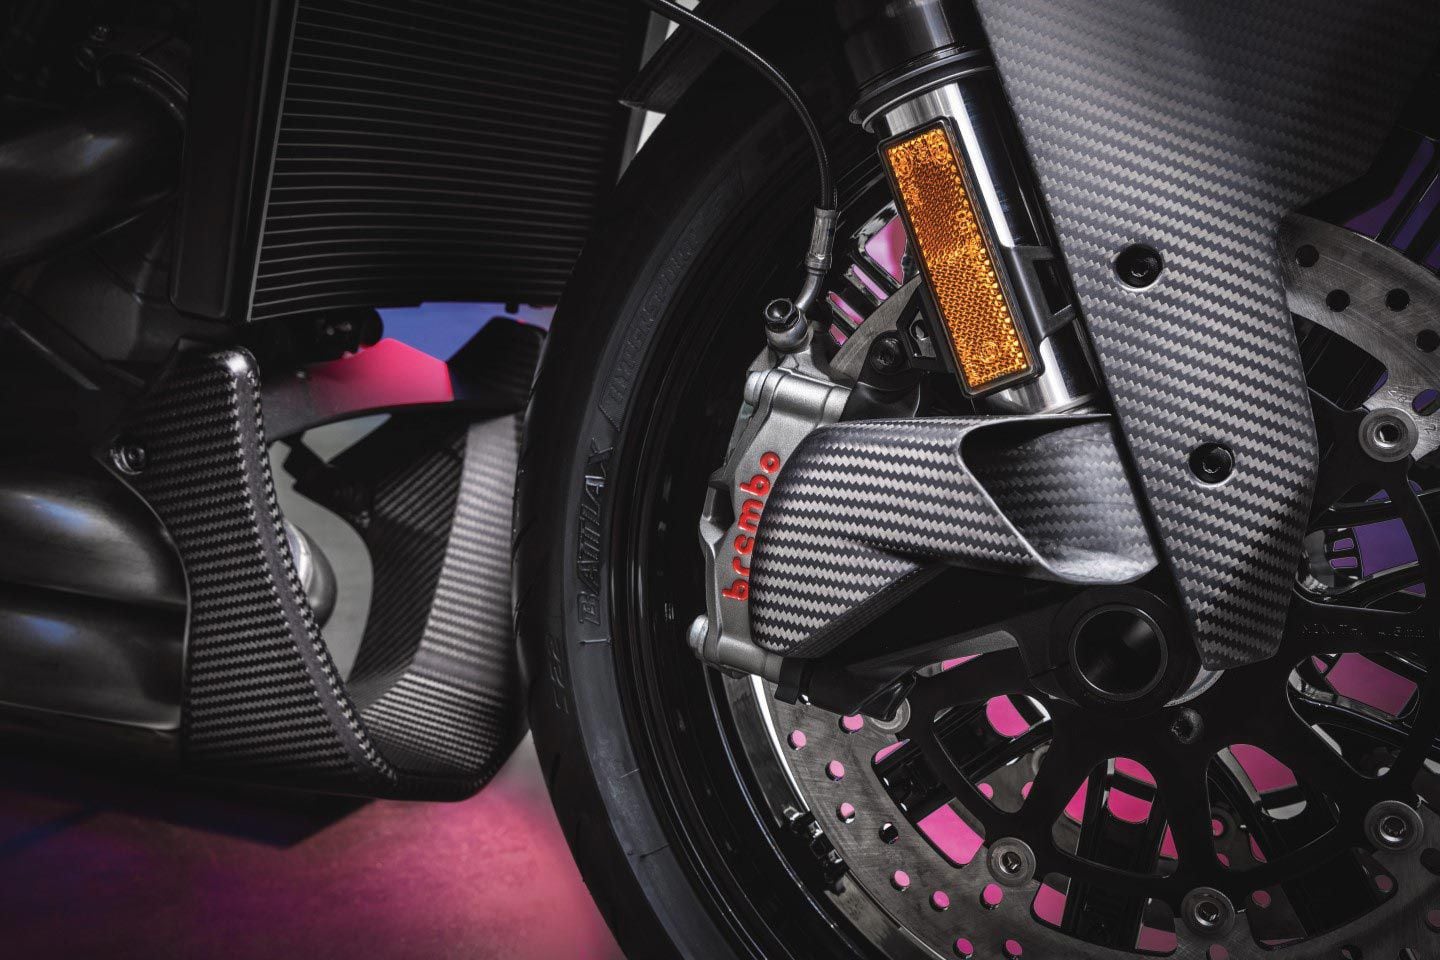 The Brembo Stylema brakes get a MotoGP-style air duct.